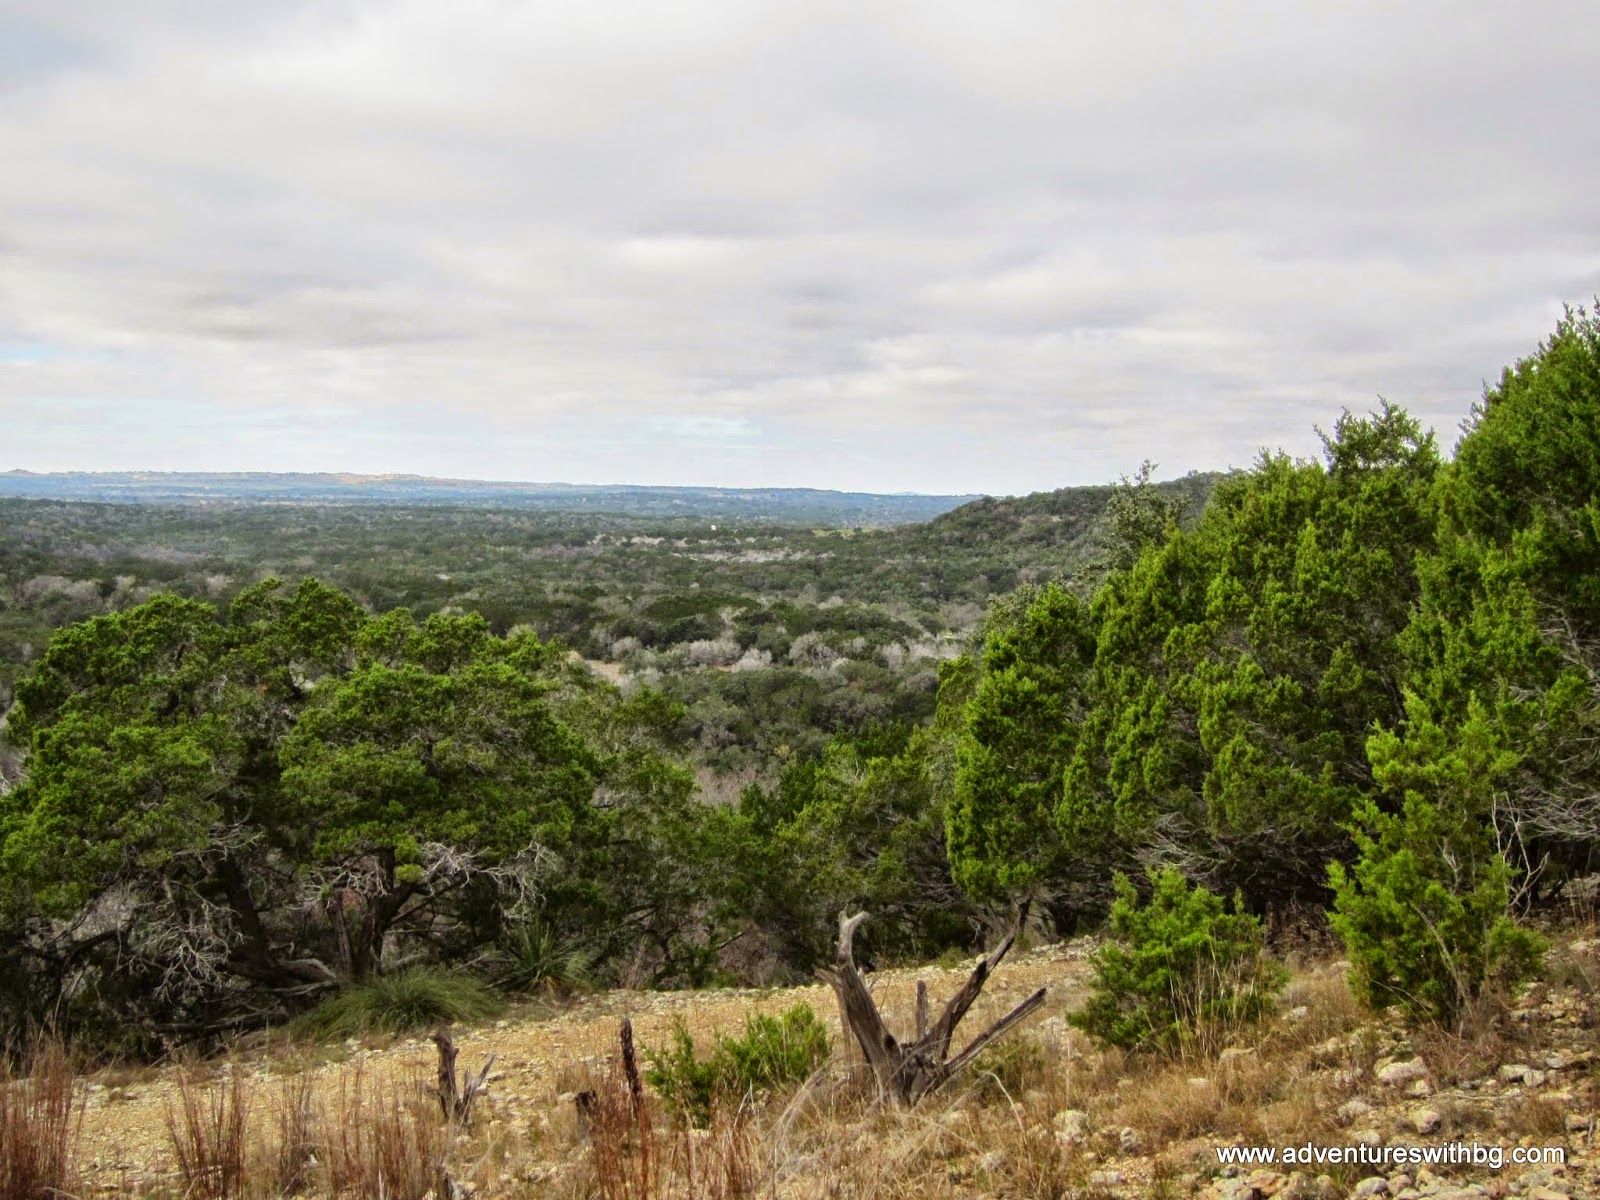 You can see the Texas Hill country and Texas Mountains.